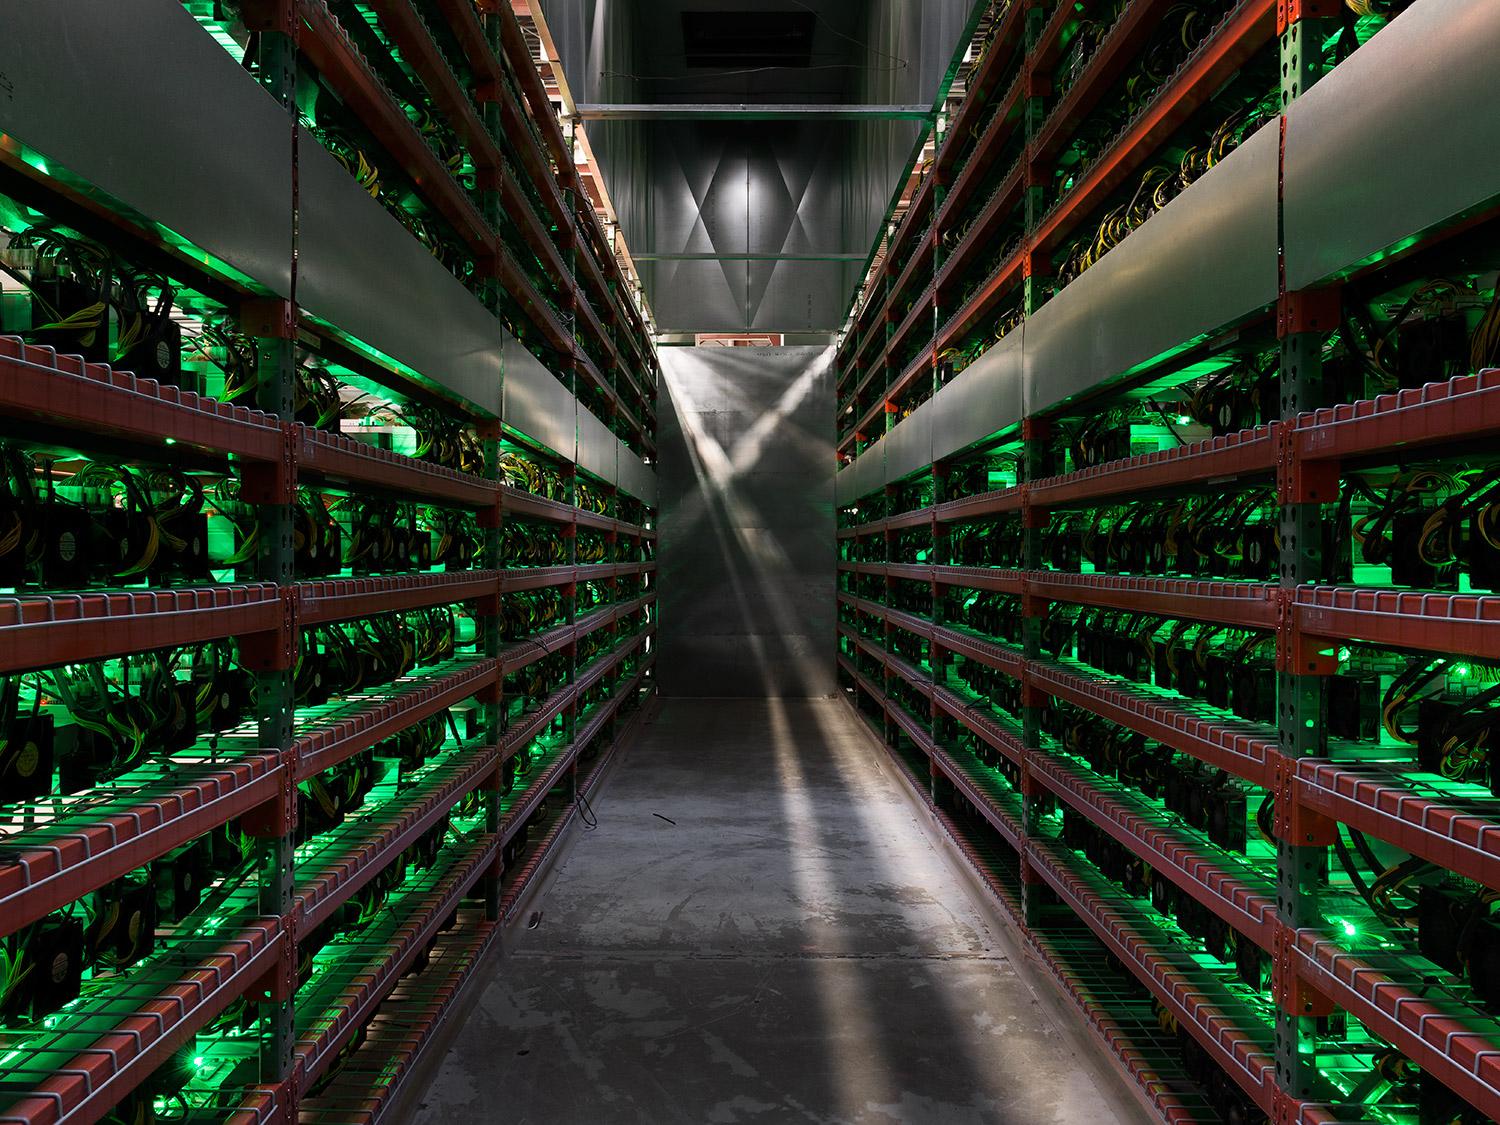 Hot Aisles  (Cryptocurrency Farm) - Photograph by Christos J. Palios